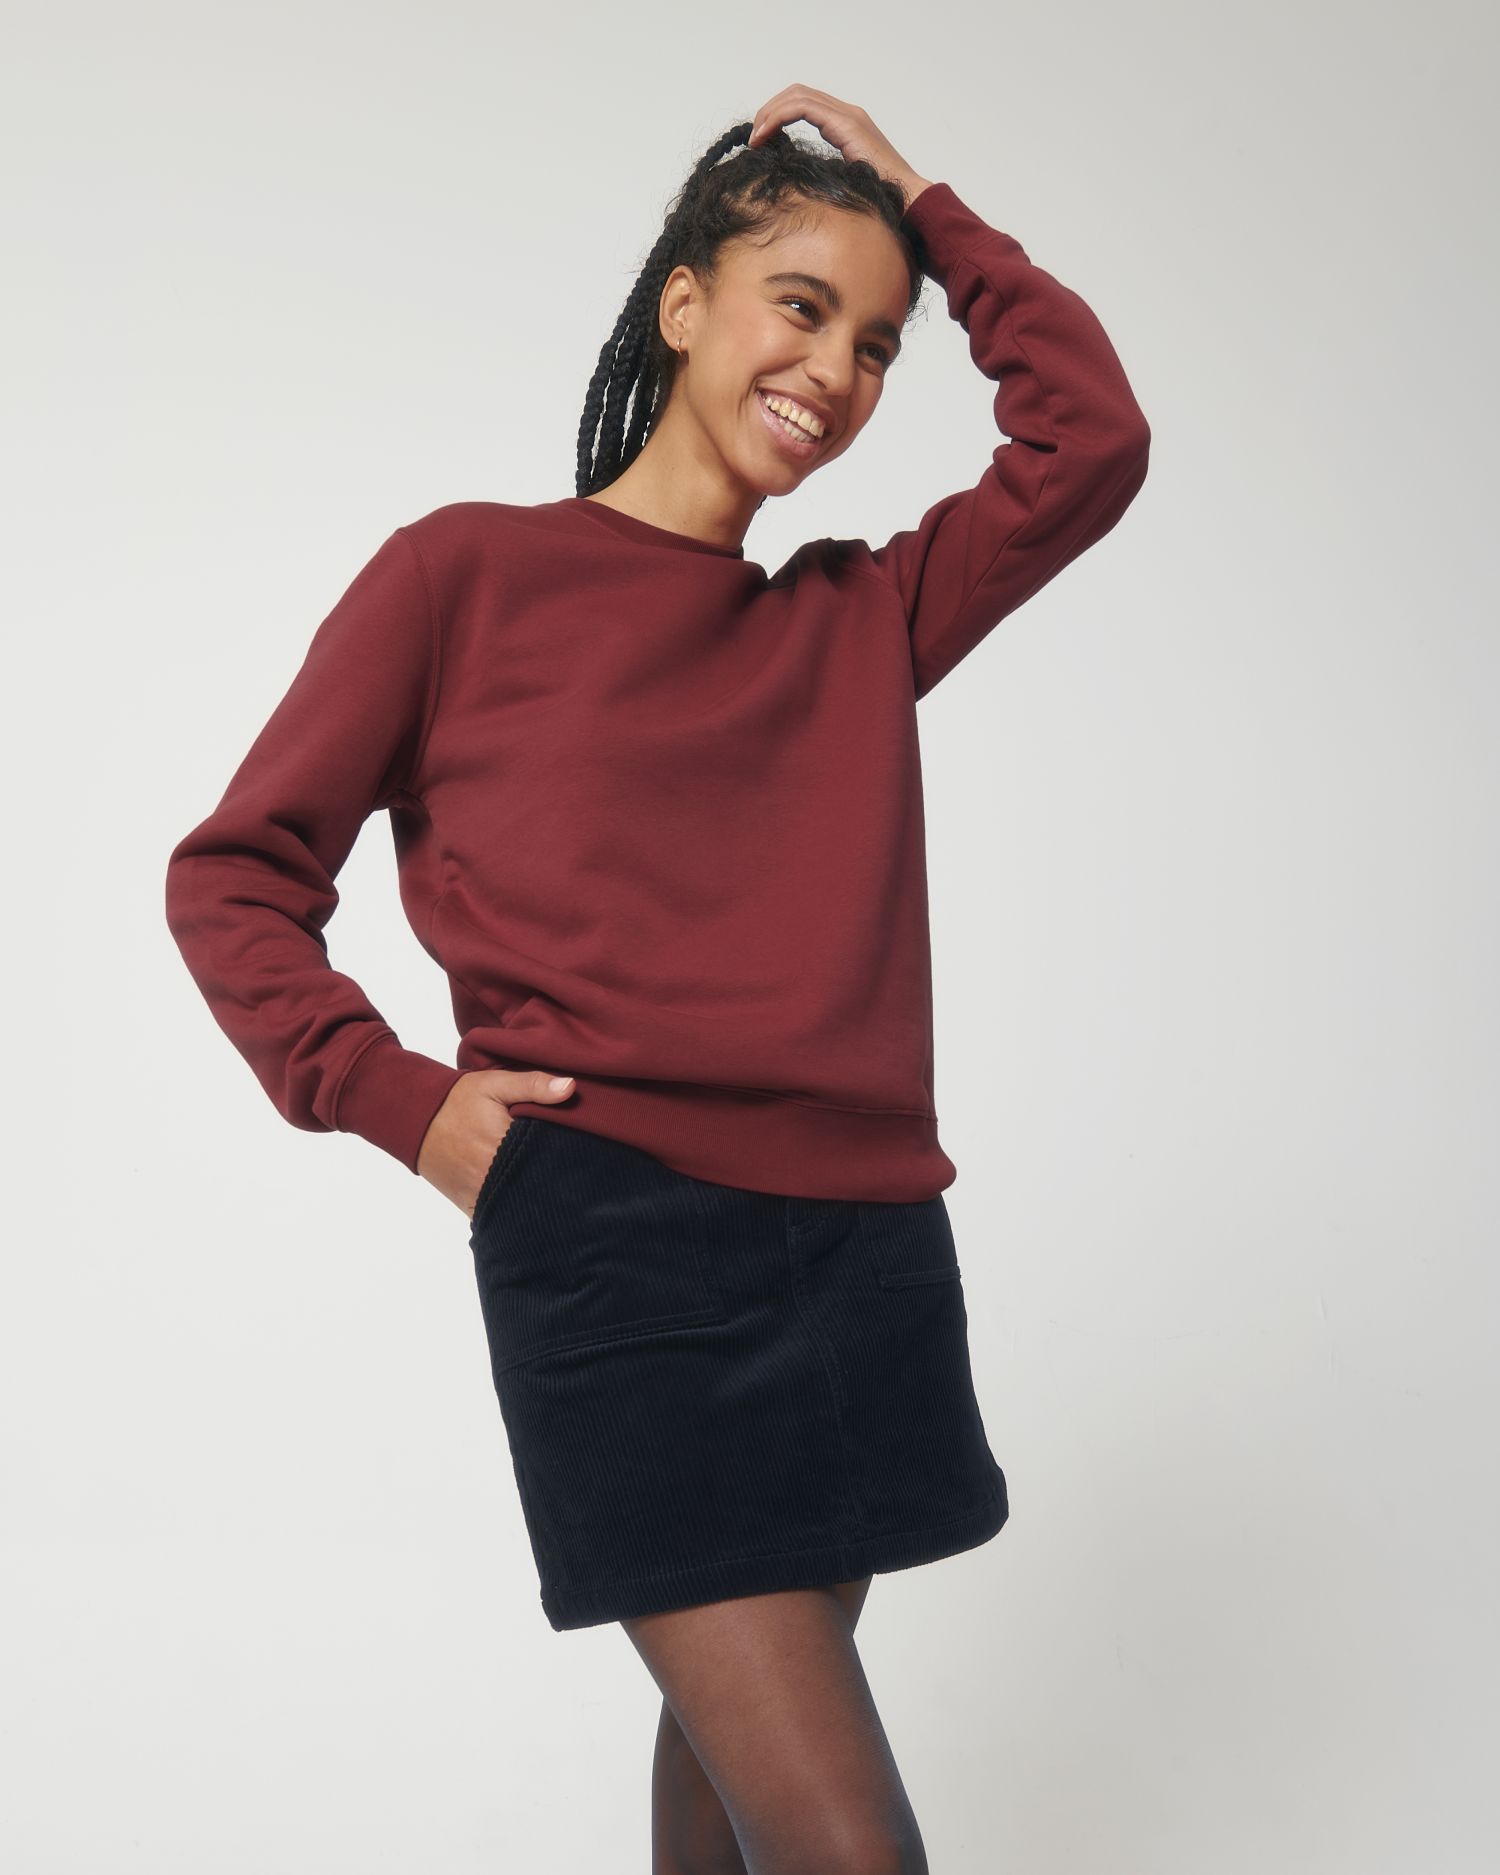 Crew neck sweatshirts Changer in Farbe Red Earth